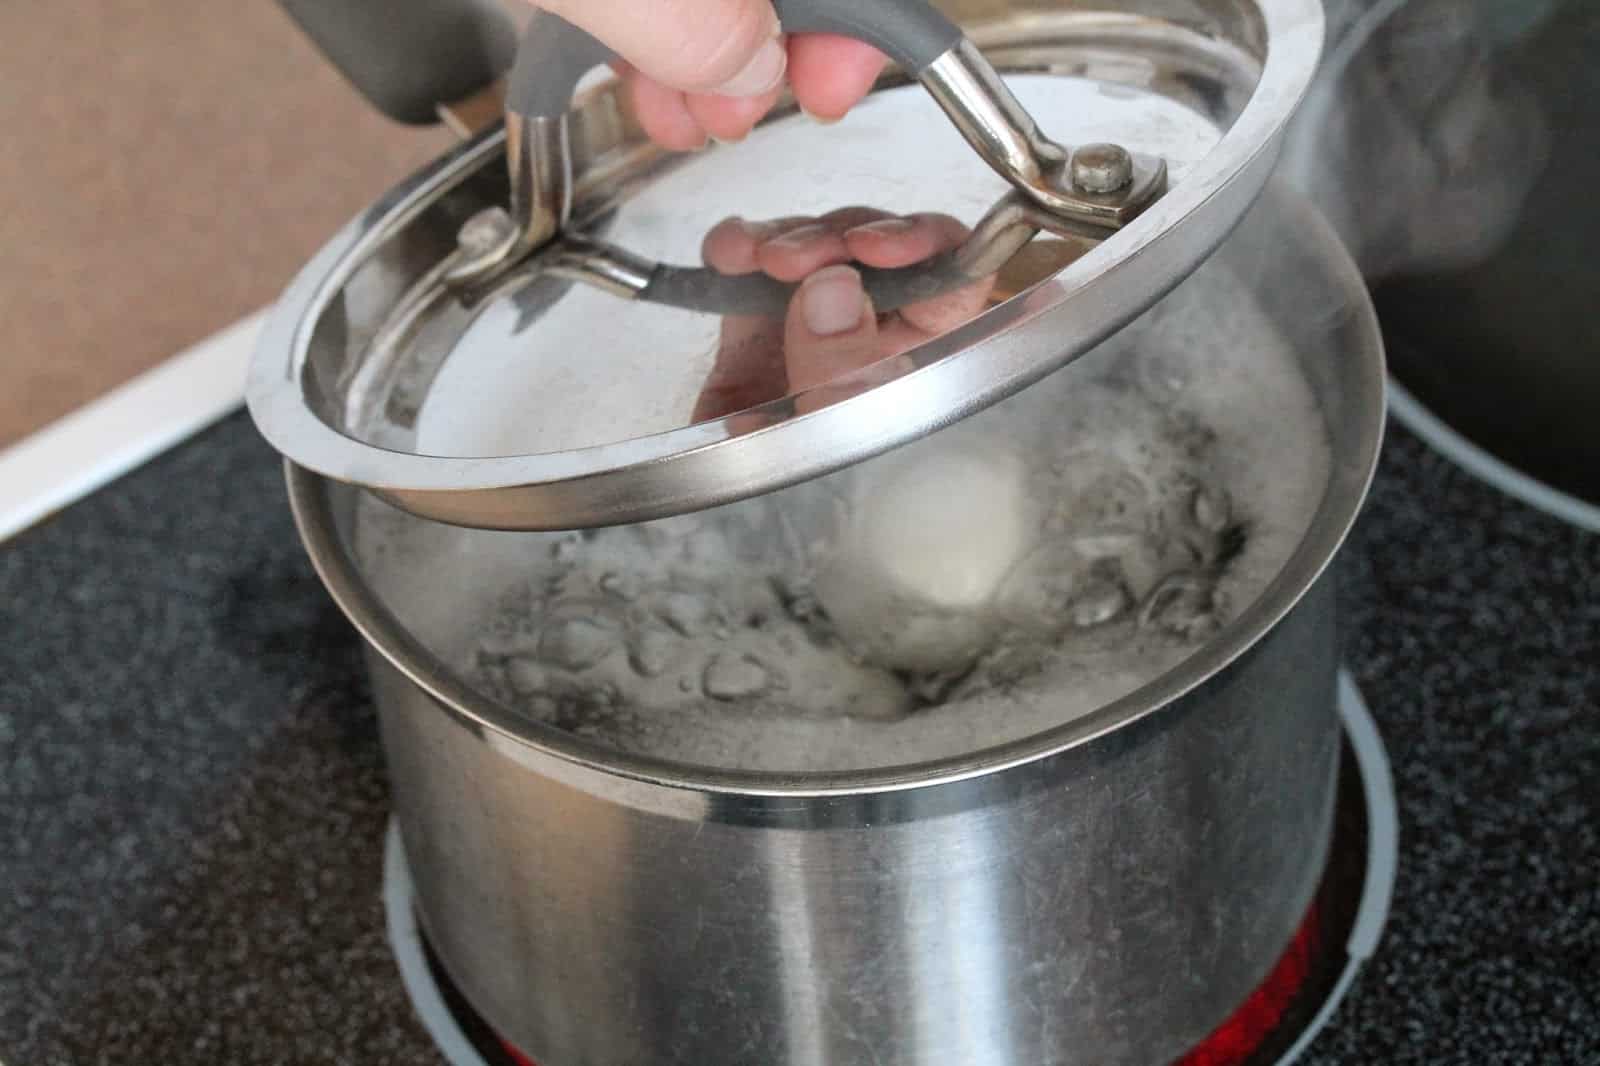 How to Boil Eggs - 7